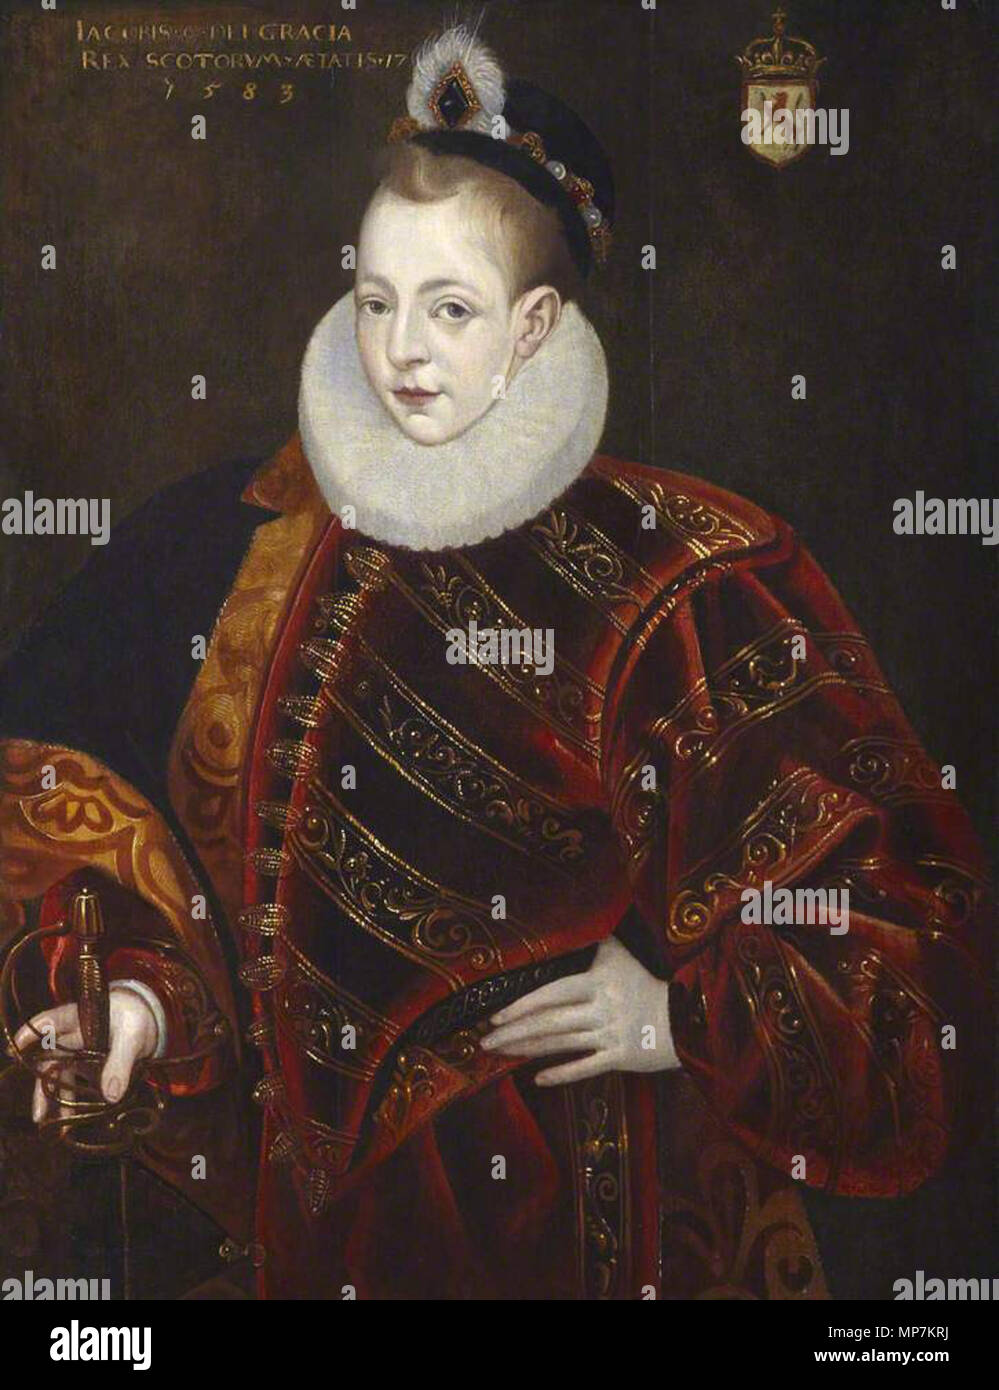 . Portrait of James VI of Scotland, later James I of Engliand (1566-1625), 1583. 1583.   Possibly Adrian Vanson  (fl. 1581–1602)    Alternative names Adrian van Son  Description Flemish painter  Date of birth/death 1602  Work period from 1581 until 1602  Work location Edinburgh  Authority control  : Q4685406 VIAF: 96468392 ULAN: 500105621 RKD: 73904      Possibly Arnold Bronckorst  (fl. 1565–1583)    Alternative names Arnold van Bronckhorst, Arnold van Brounckhorst, Arnold van Brounckhurst  Description Netherlandish painter and court painter  Date of birth/death 1565 1583  Work period from 156 Stock Photo